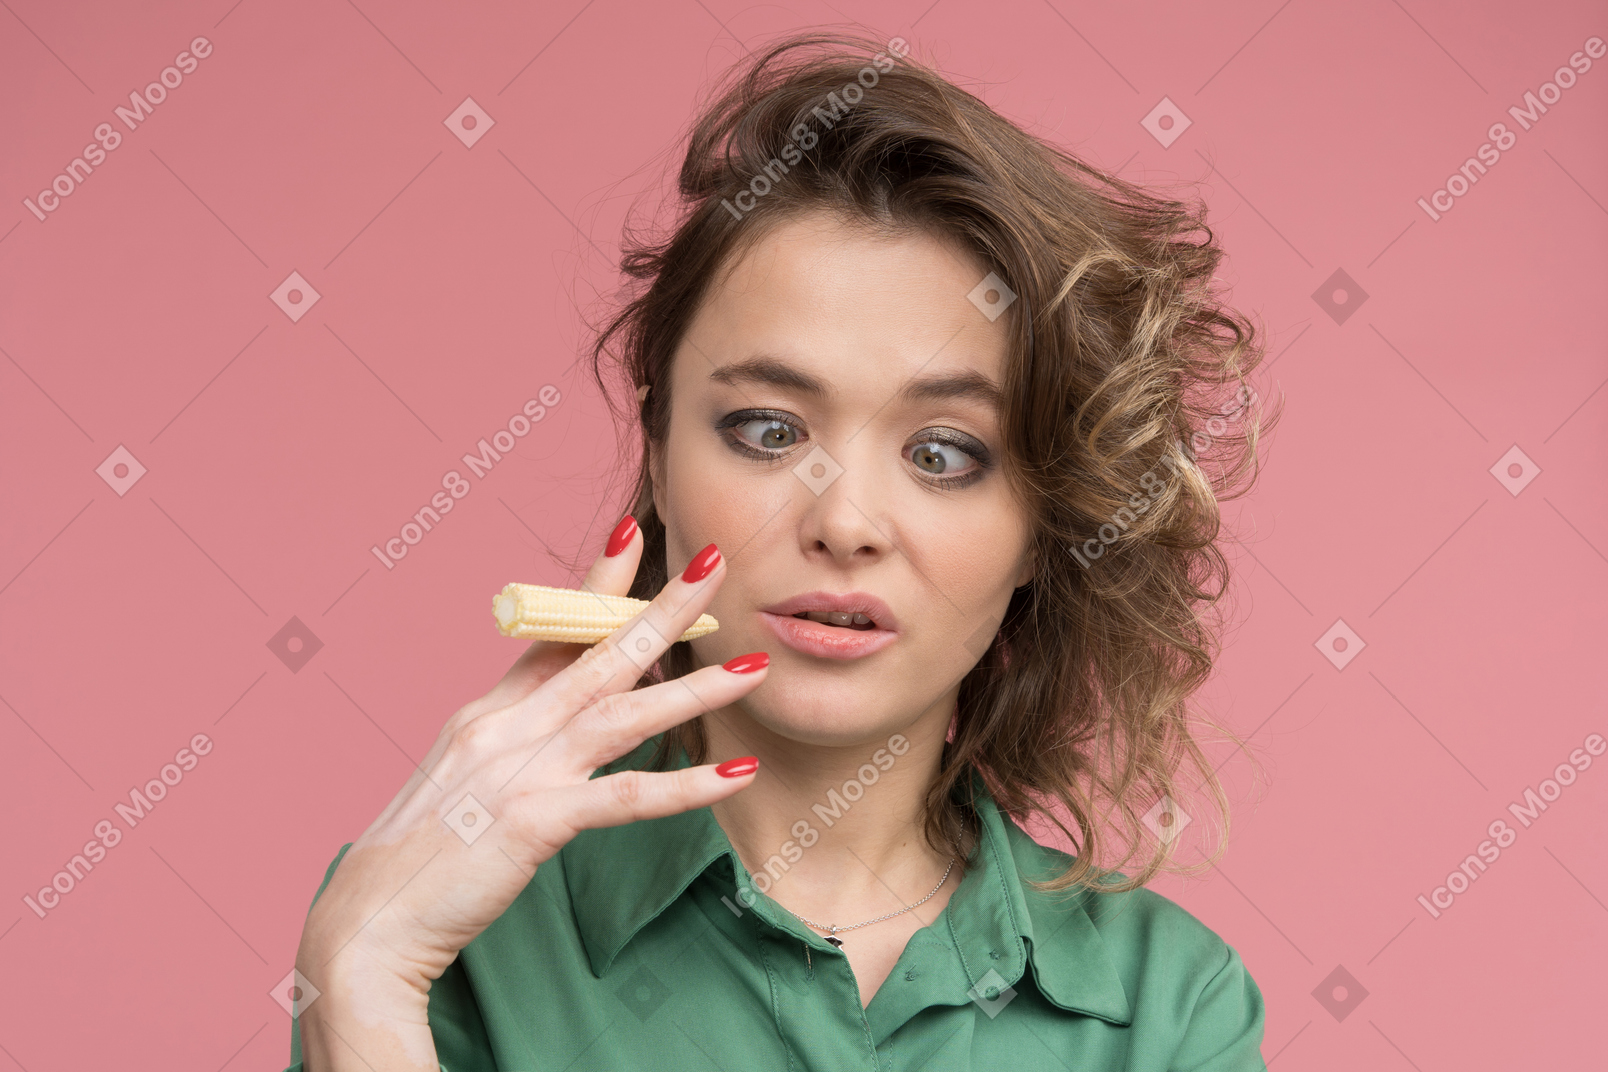 Woman being affected with a cigar smoking